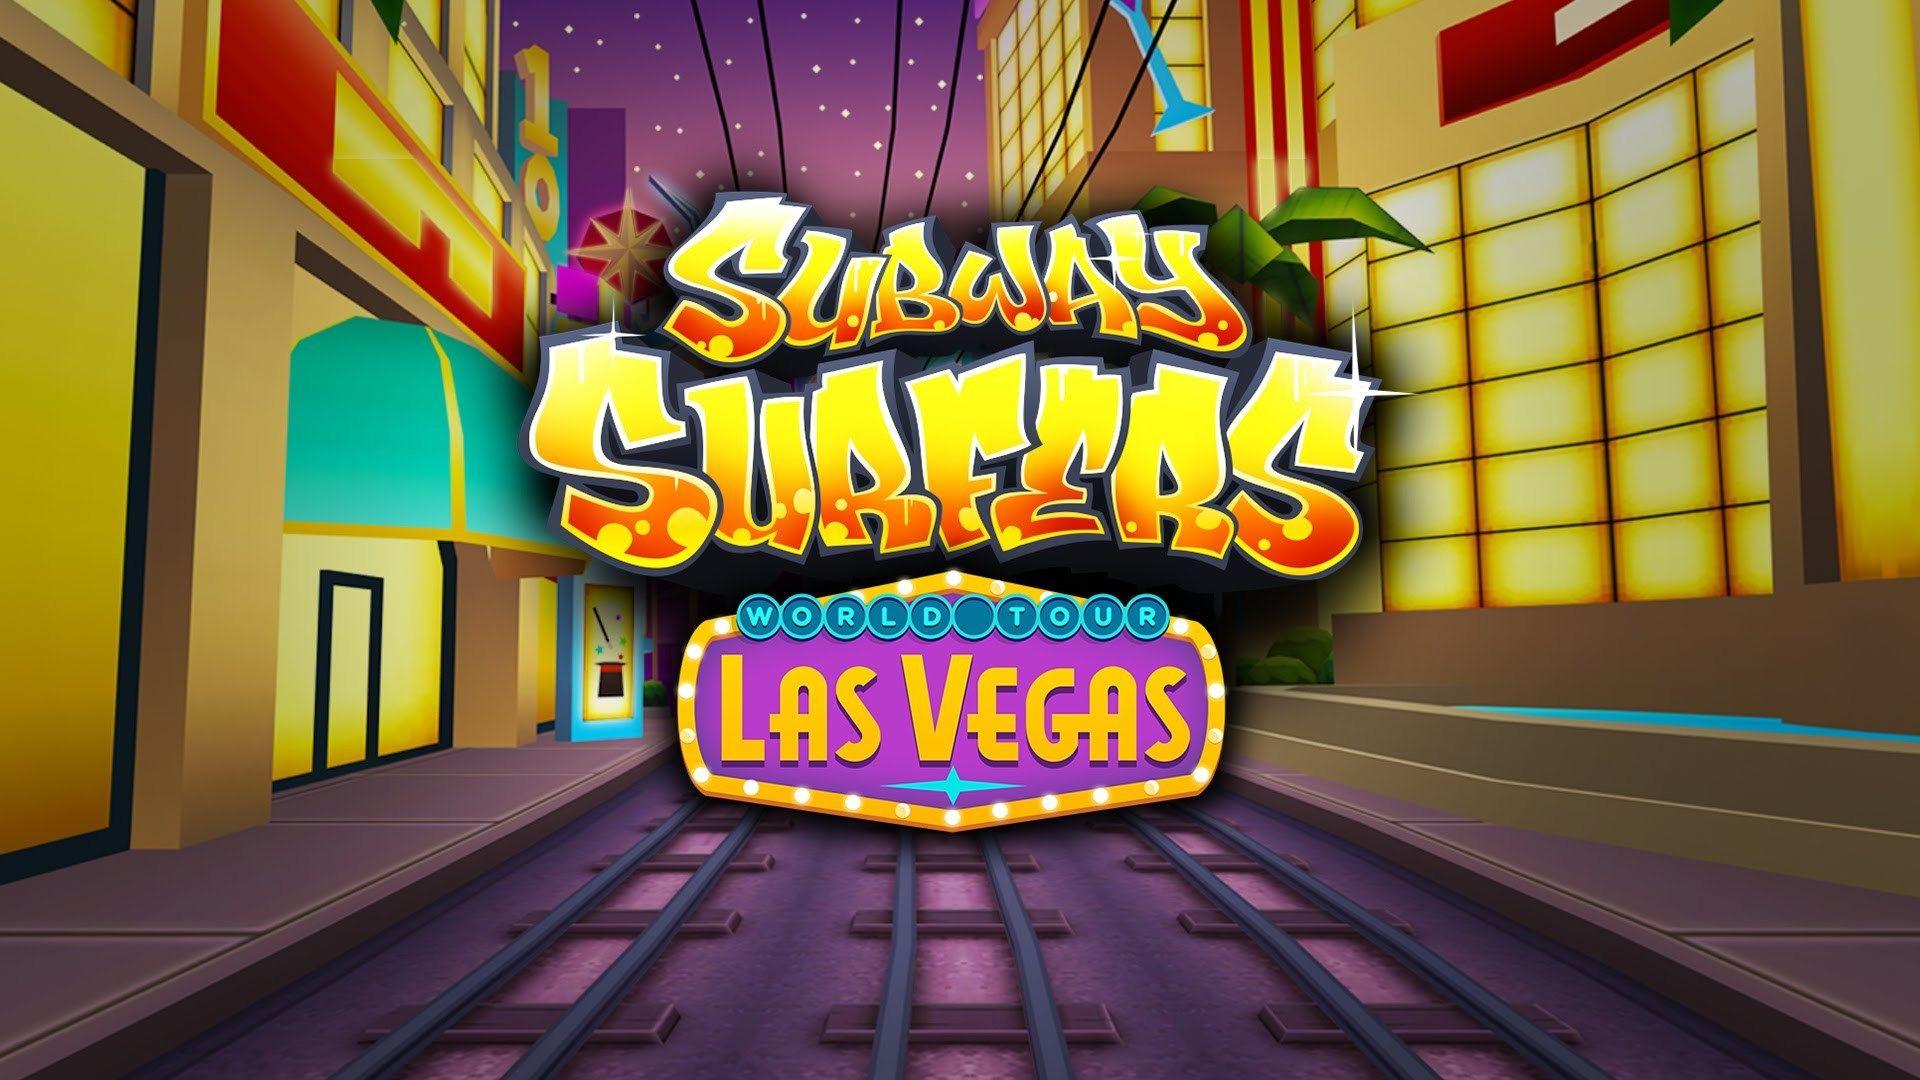 Subway Surfers Wallpapers Wallpaper Cave